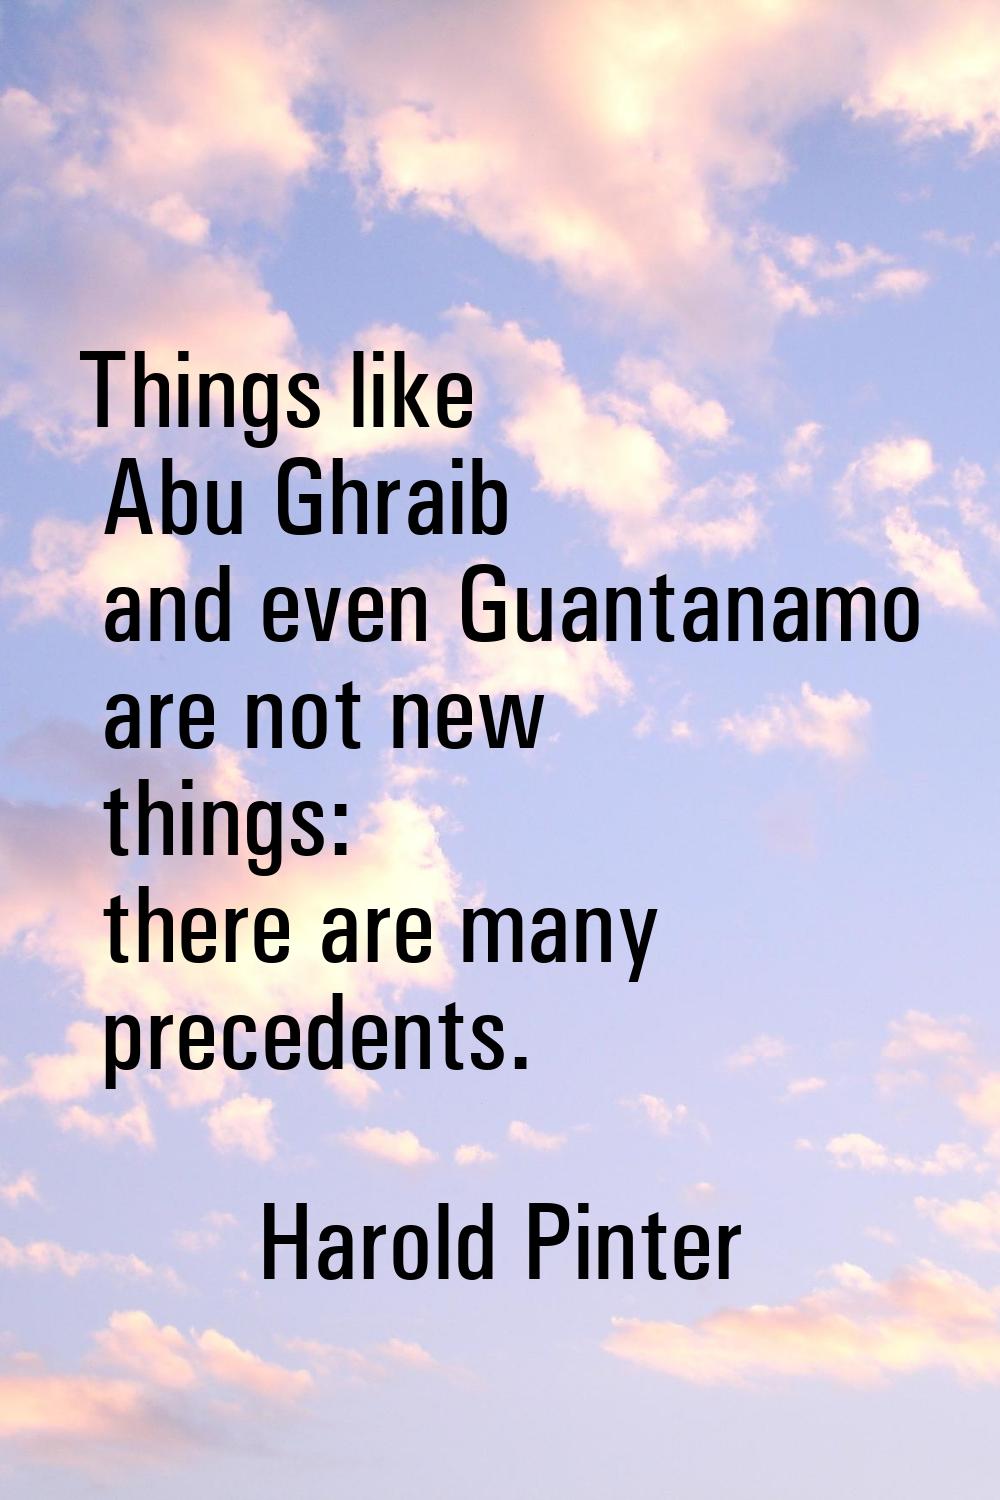 Things like Abu Ghraib and even Guantanamo are not new things: there are many precedents.